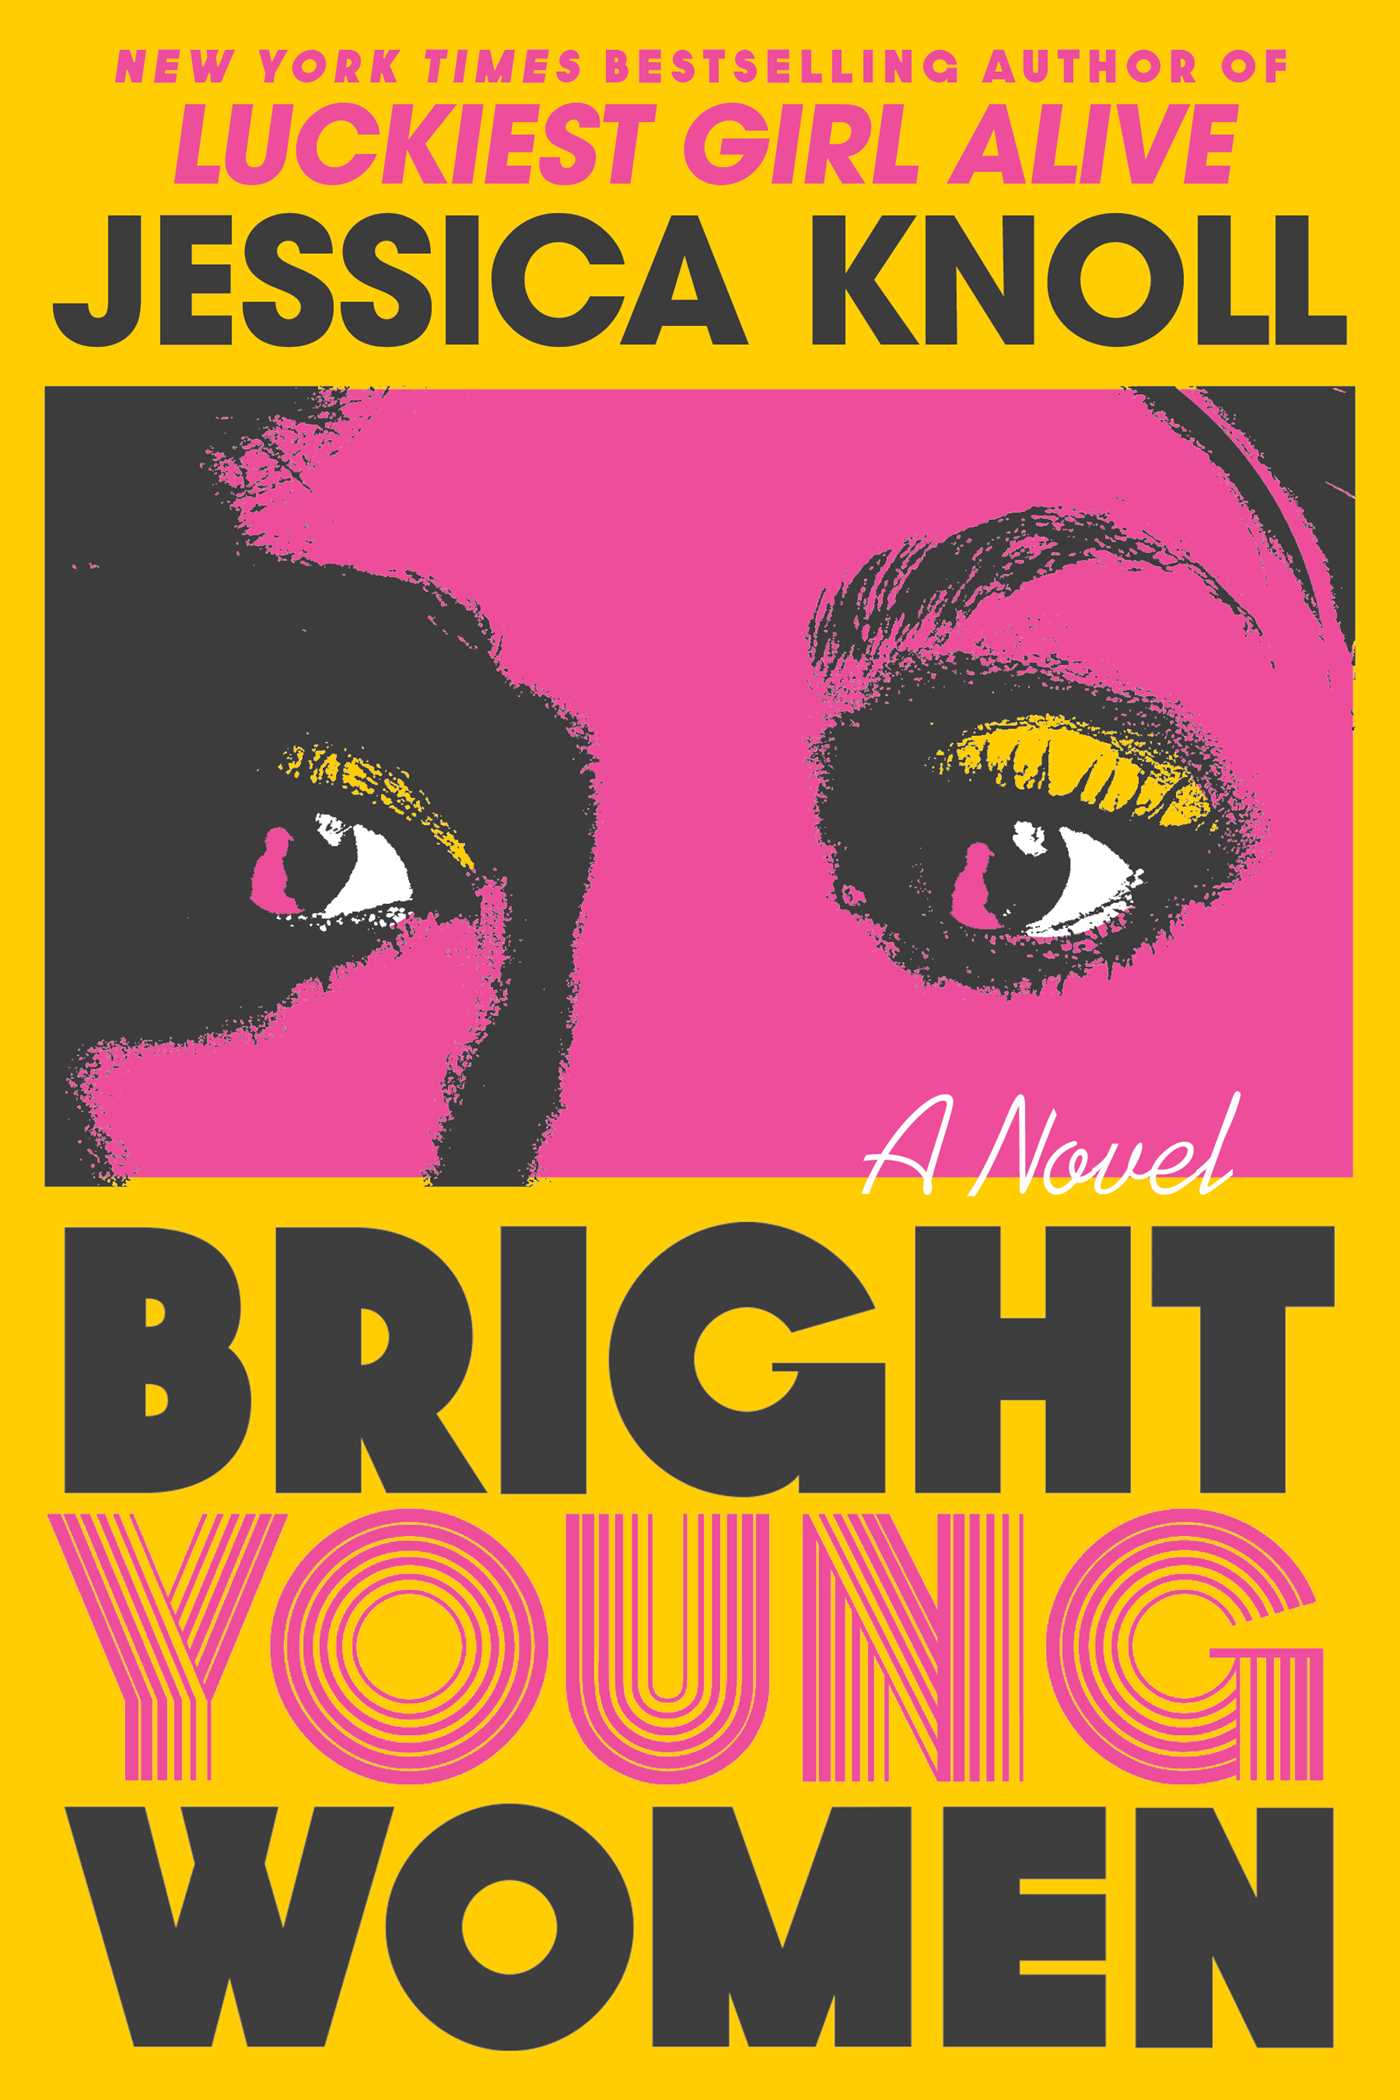 (PDF) Bright Young Women By _ (Jessica Knoll).pdf